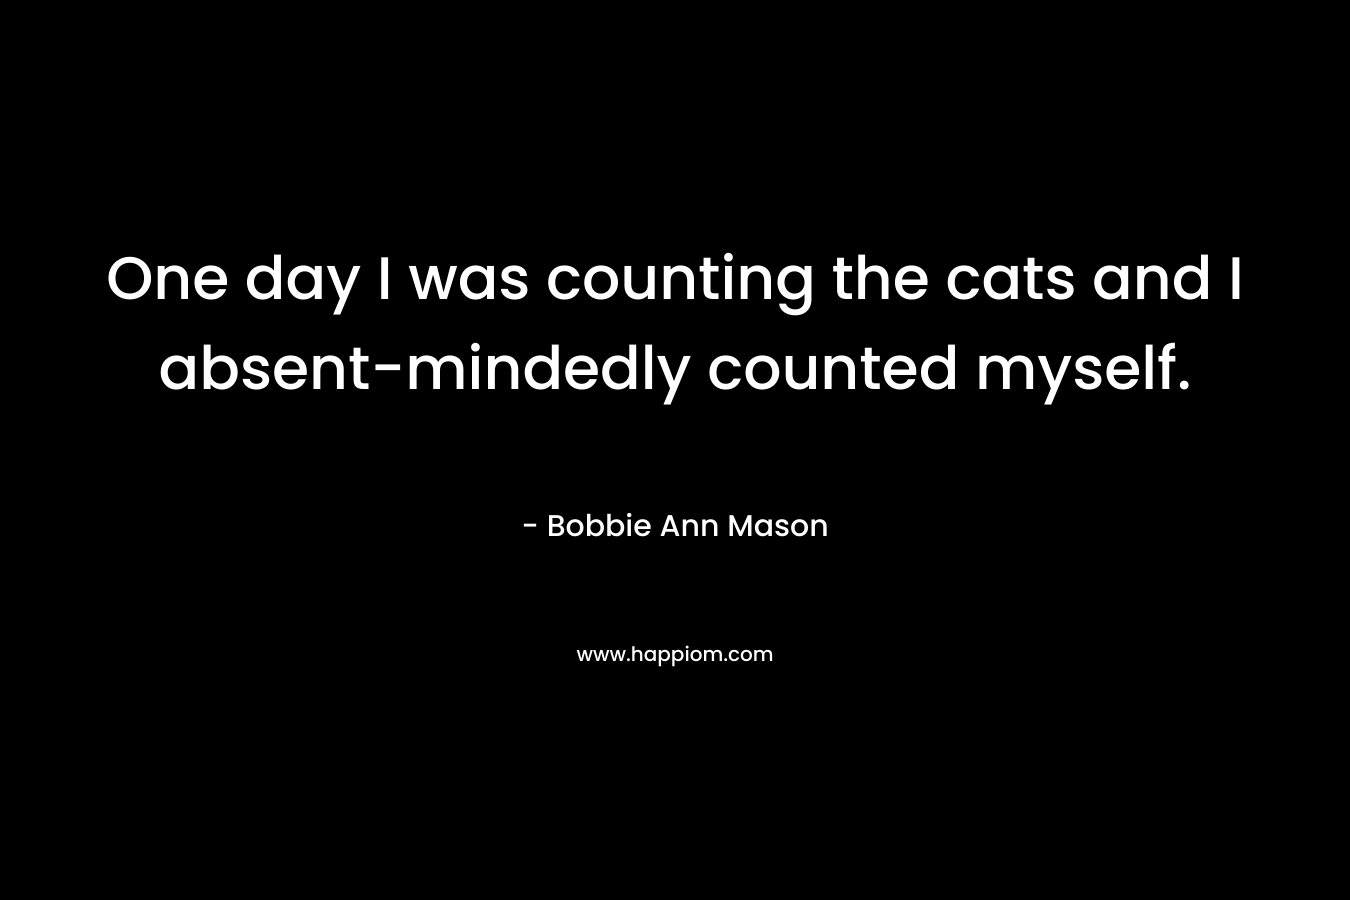 One day I was counting the cats and I absent-mindedly counted myself.